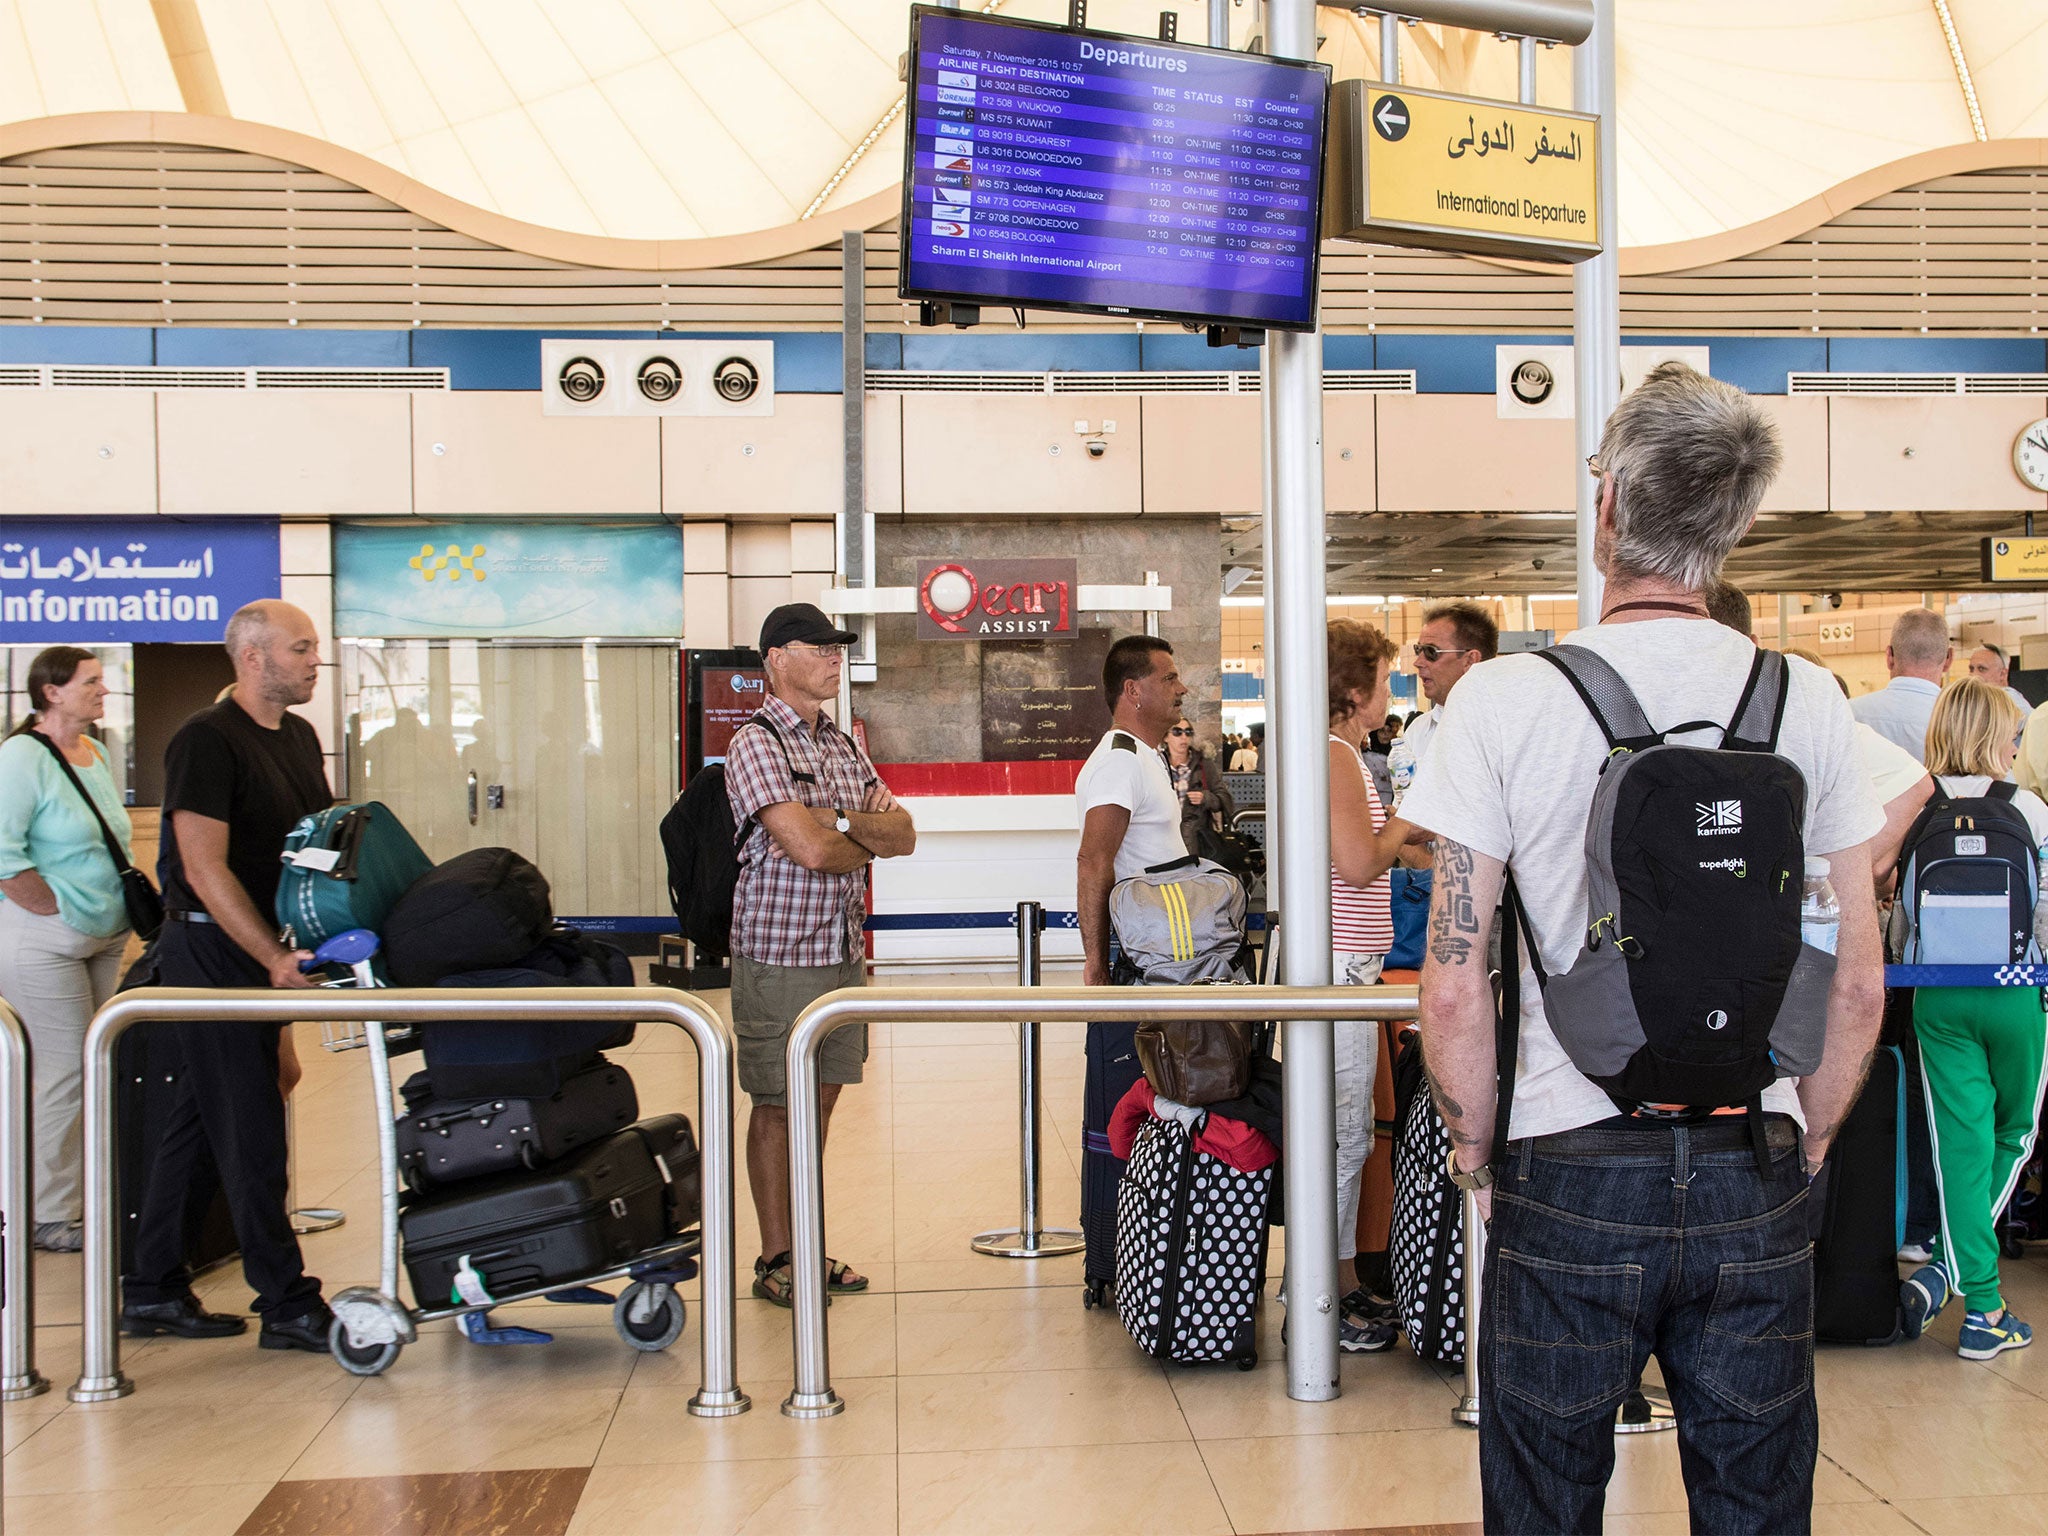 Passengers may have to fly home without their luggage